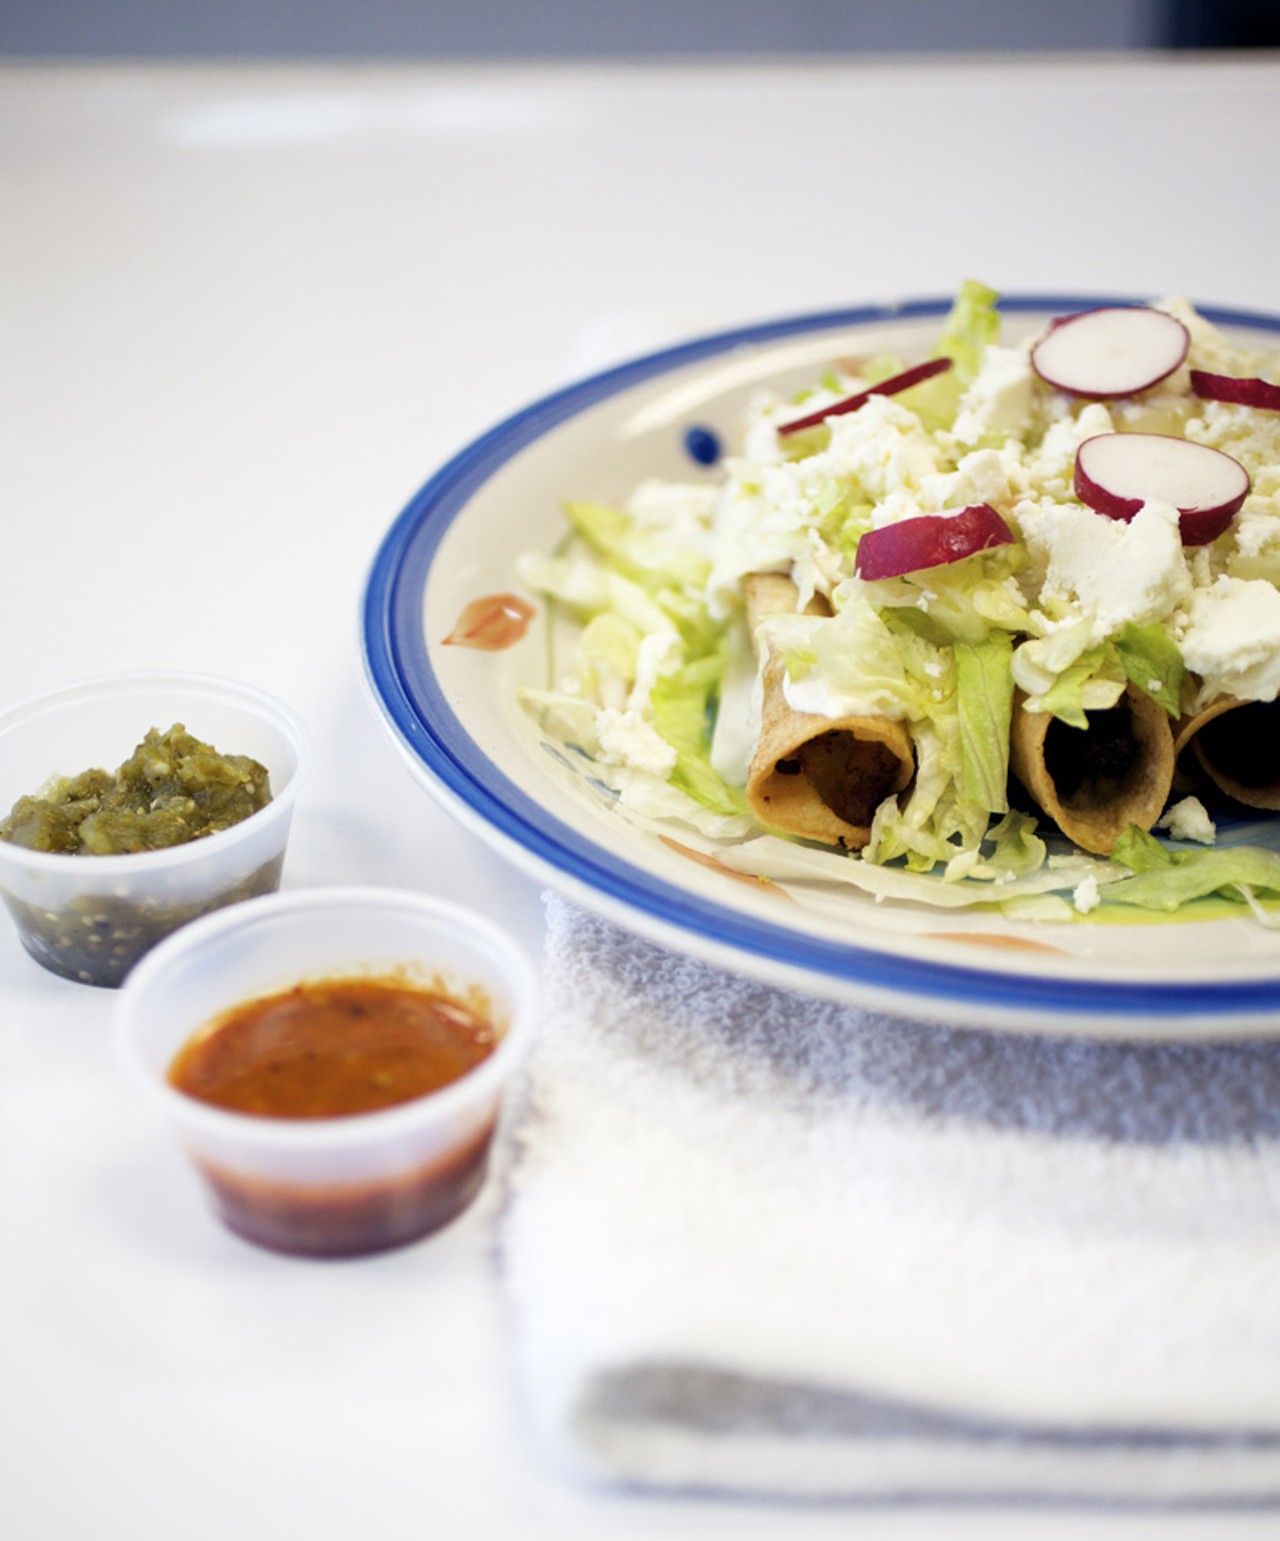 The Flautas are made with corn tortillas and your choice of meat. Here it has been prepared with chicken, and is served with lettuce, queso fresco and radishes.